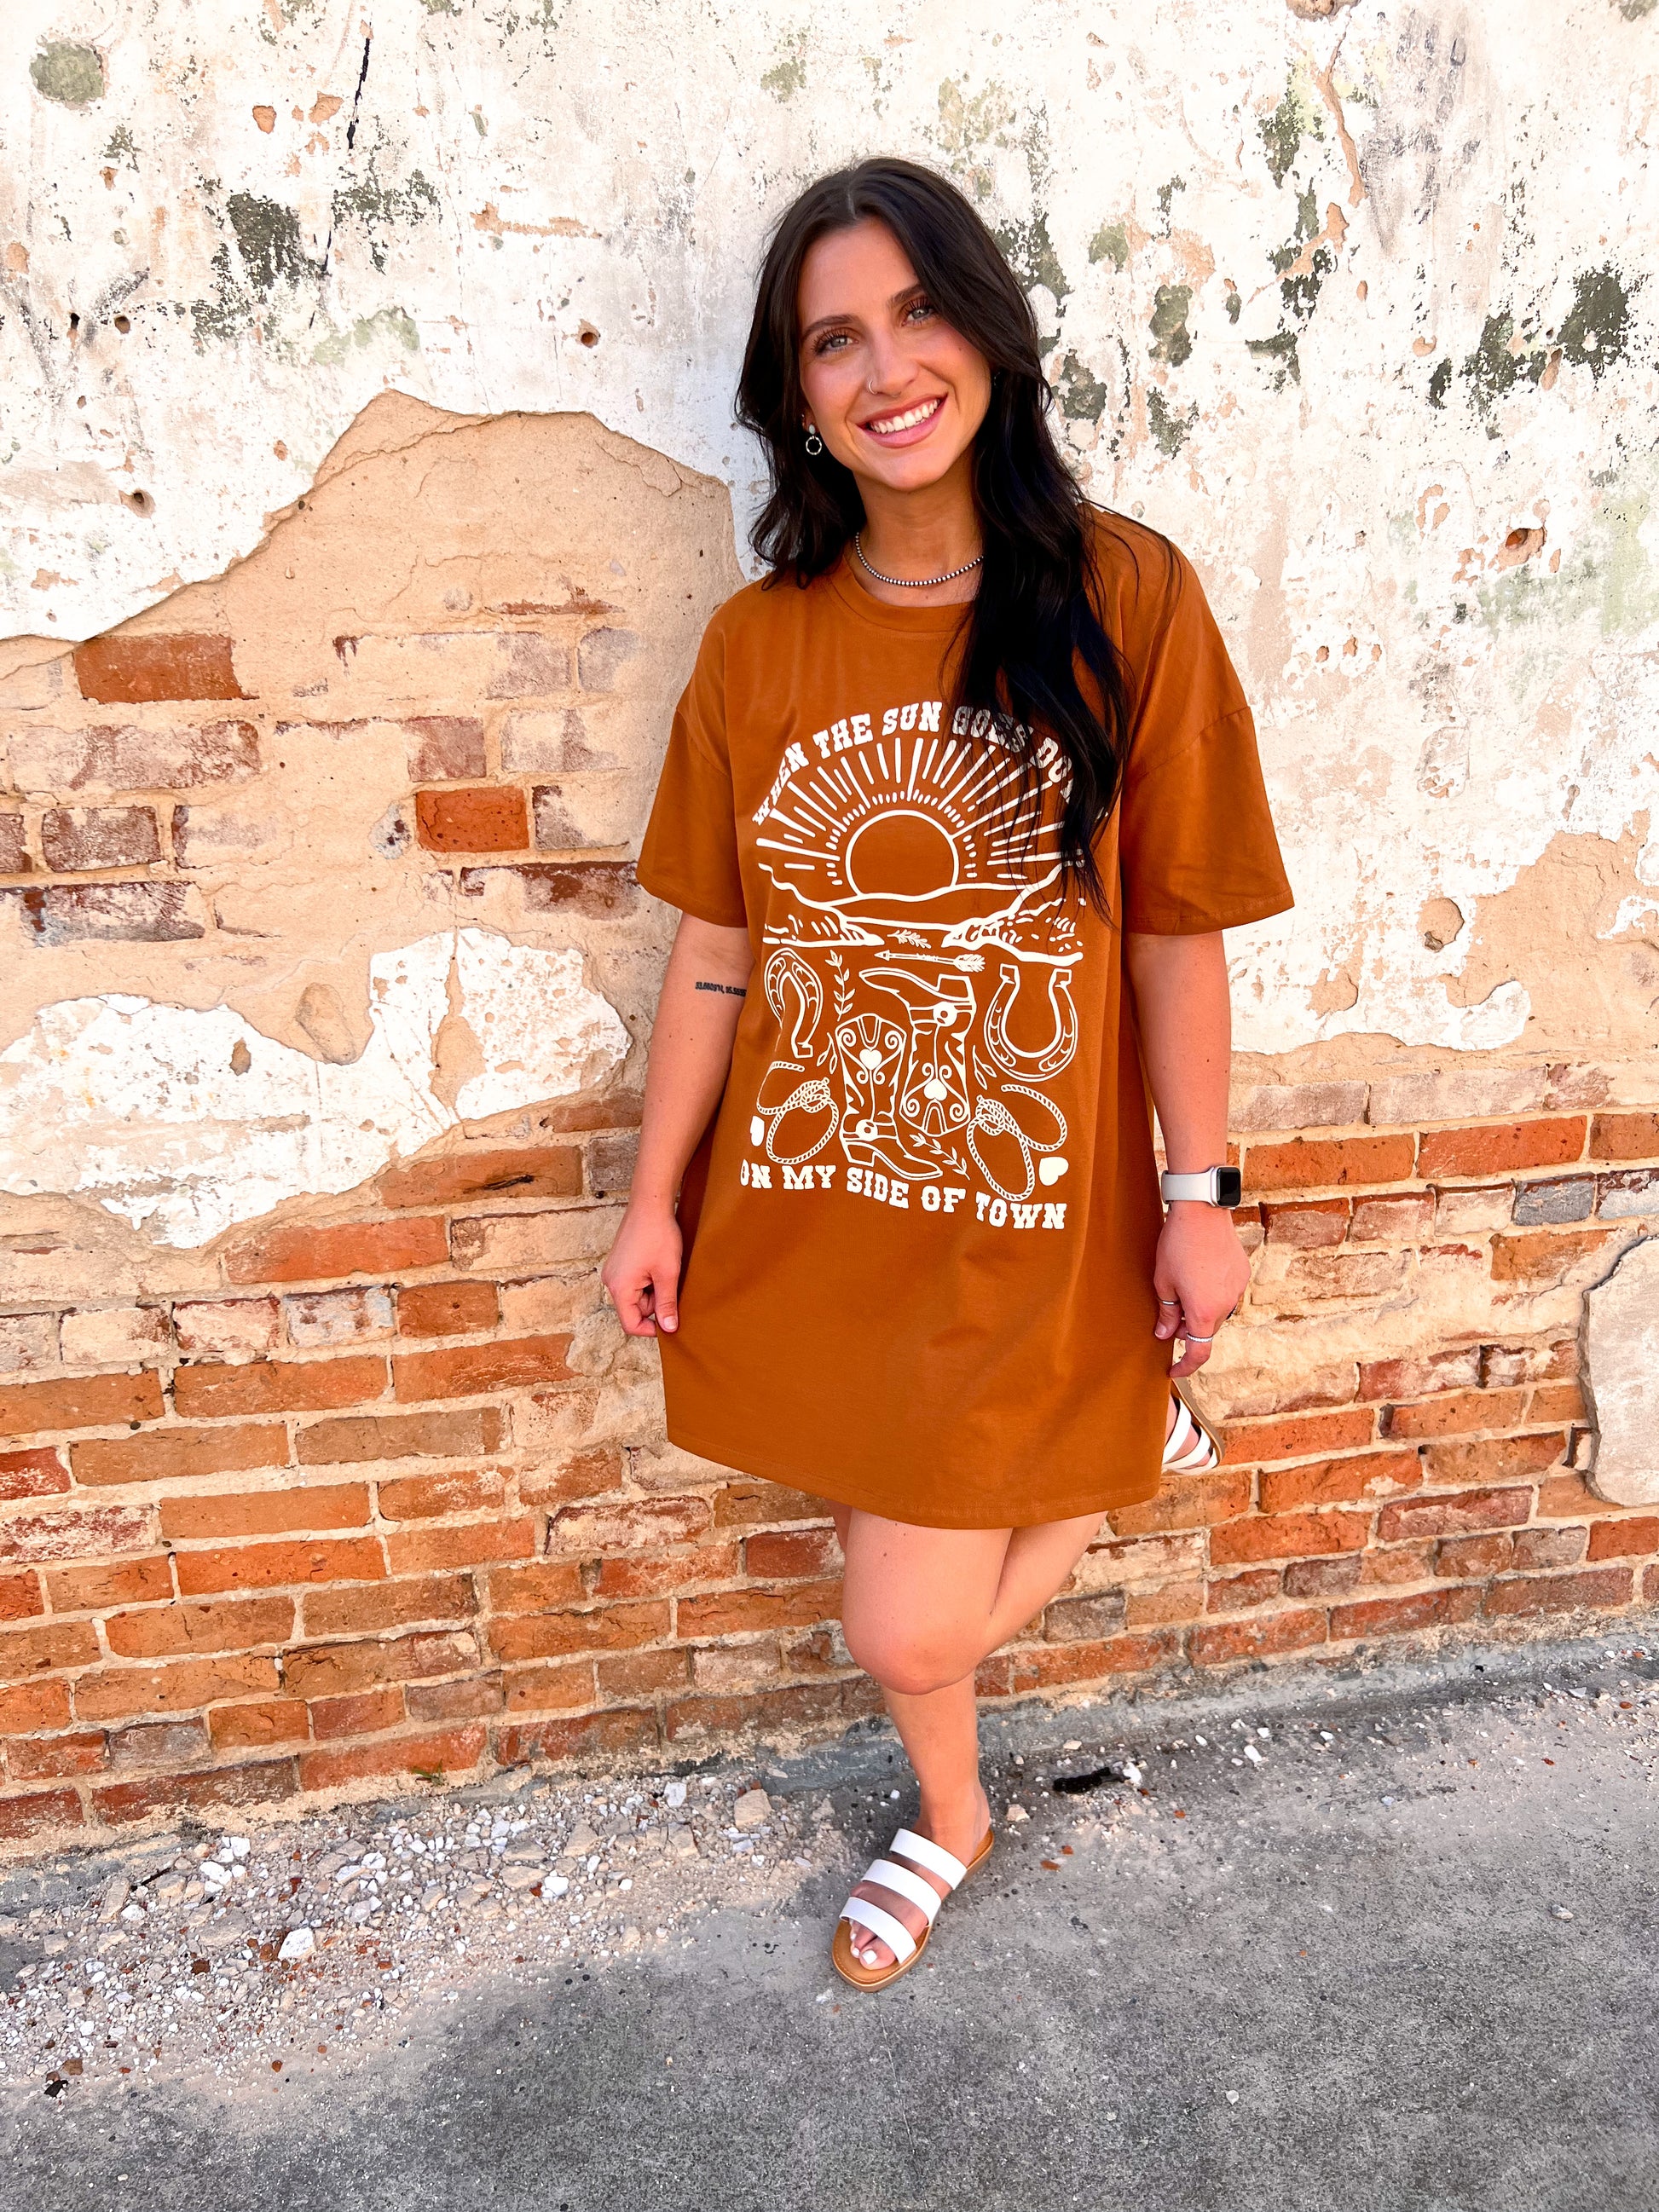 When The Sun Goes Down T-shirt Dress-Dress-Southern Grace Wholesale-6/27/23, Max Retail-The Twisted Chandelier